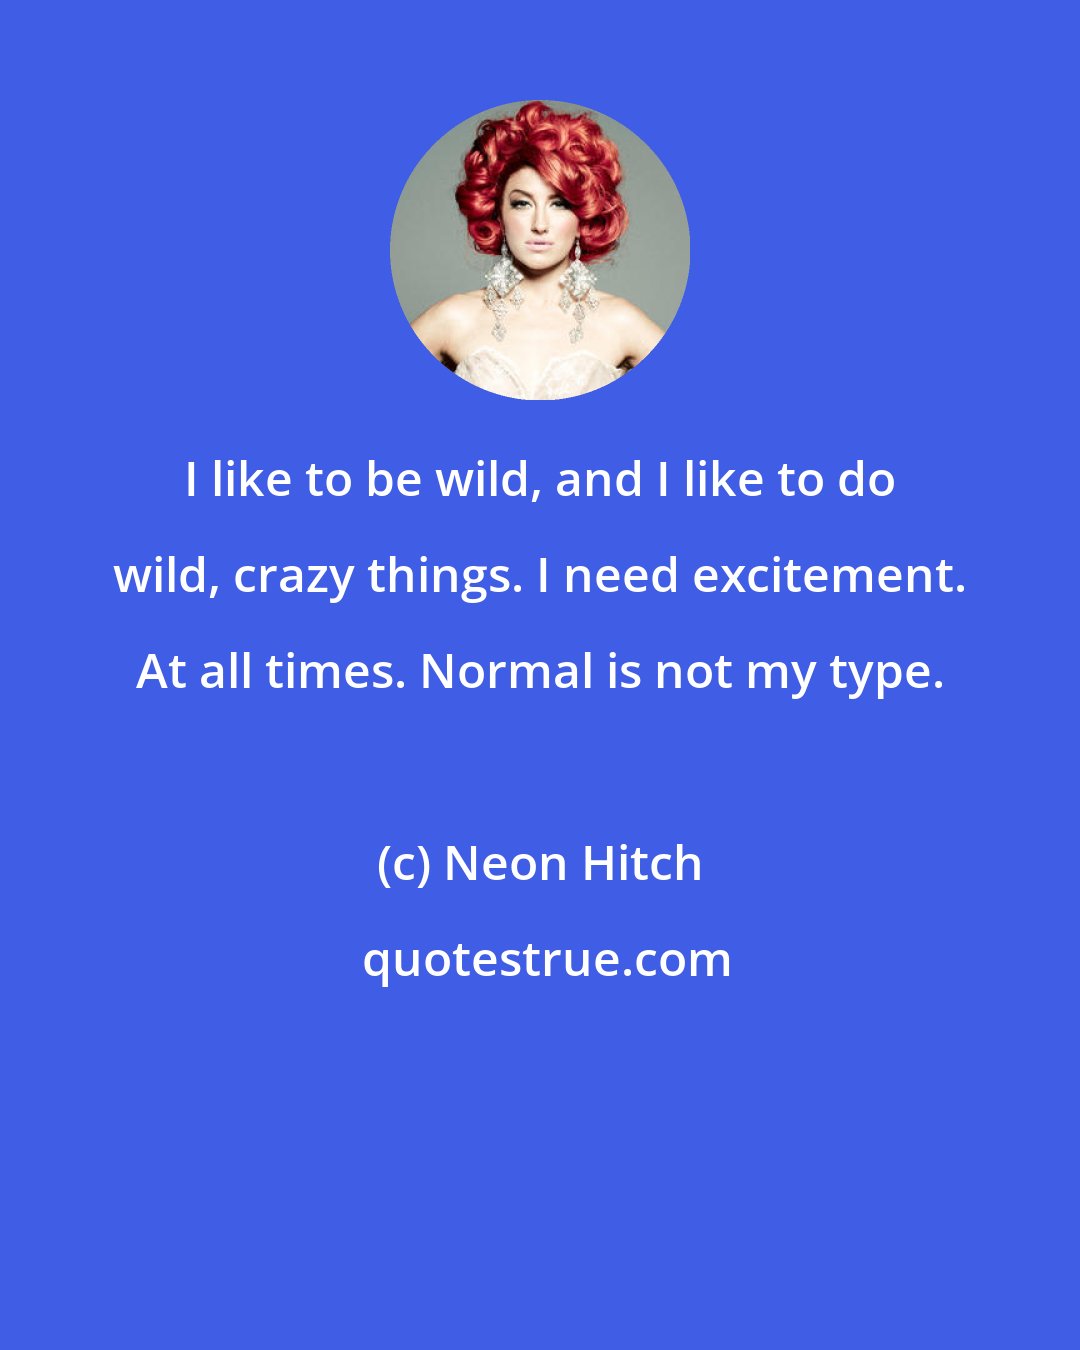 Neon Hitch: I like to be wild, and I like to do wild, crazy things. I need excitement. At all times. Normal is not my type.